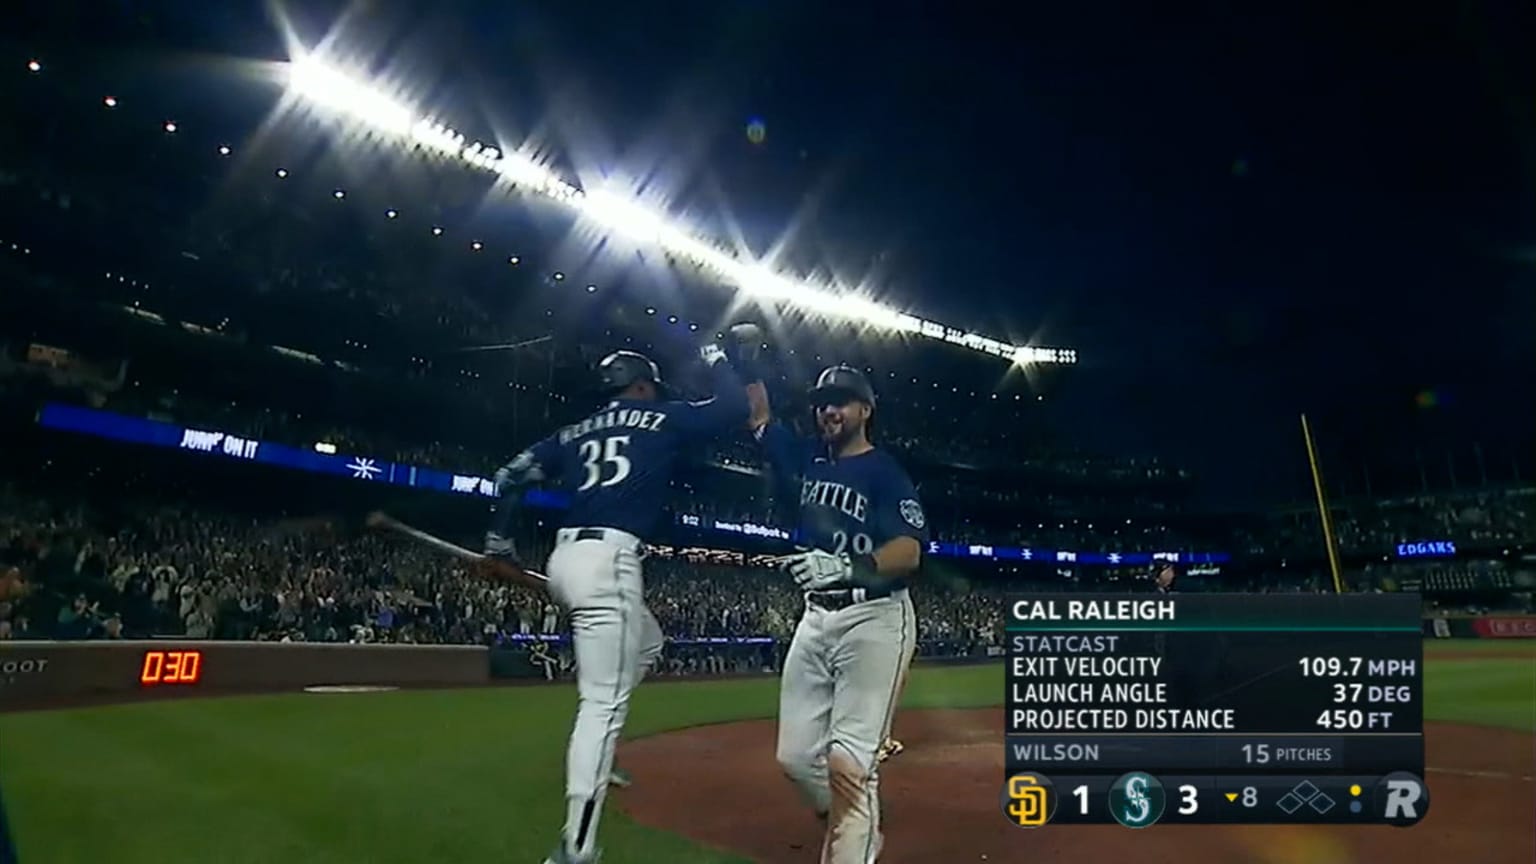 My night with the Seattle Mariners - August 6, 2019 – Steven On The Move